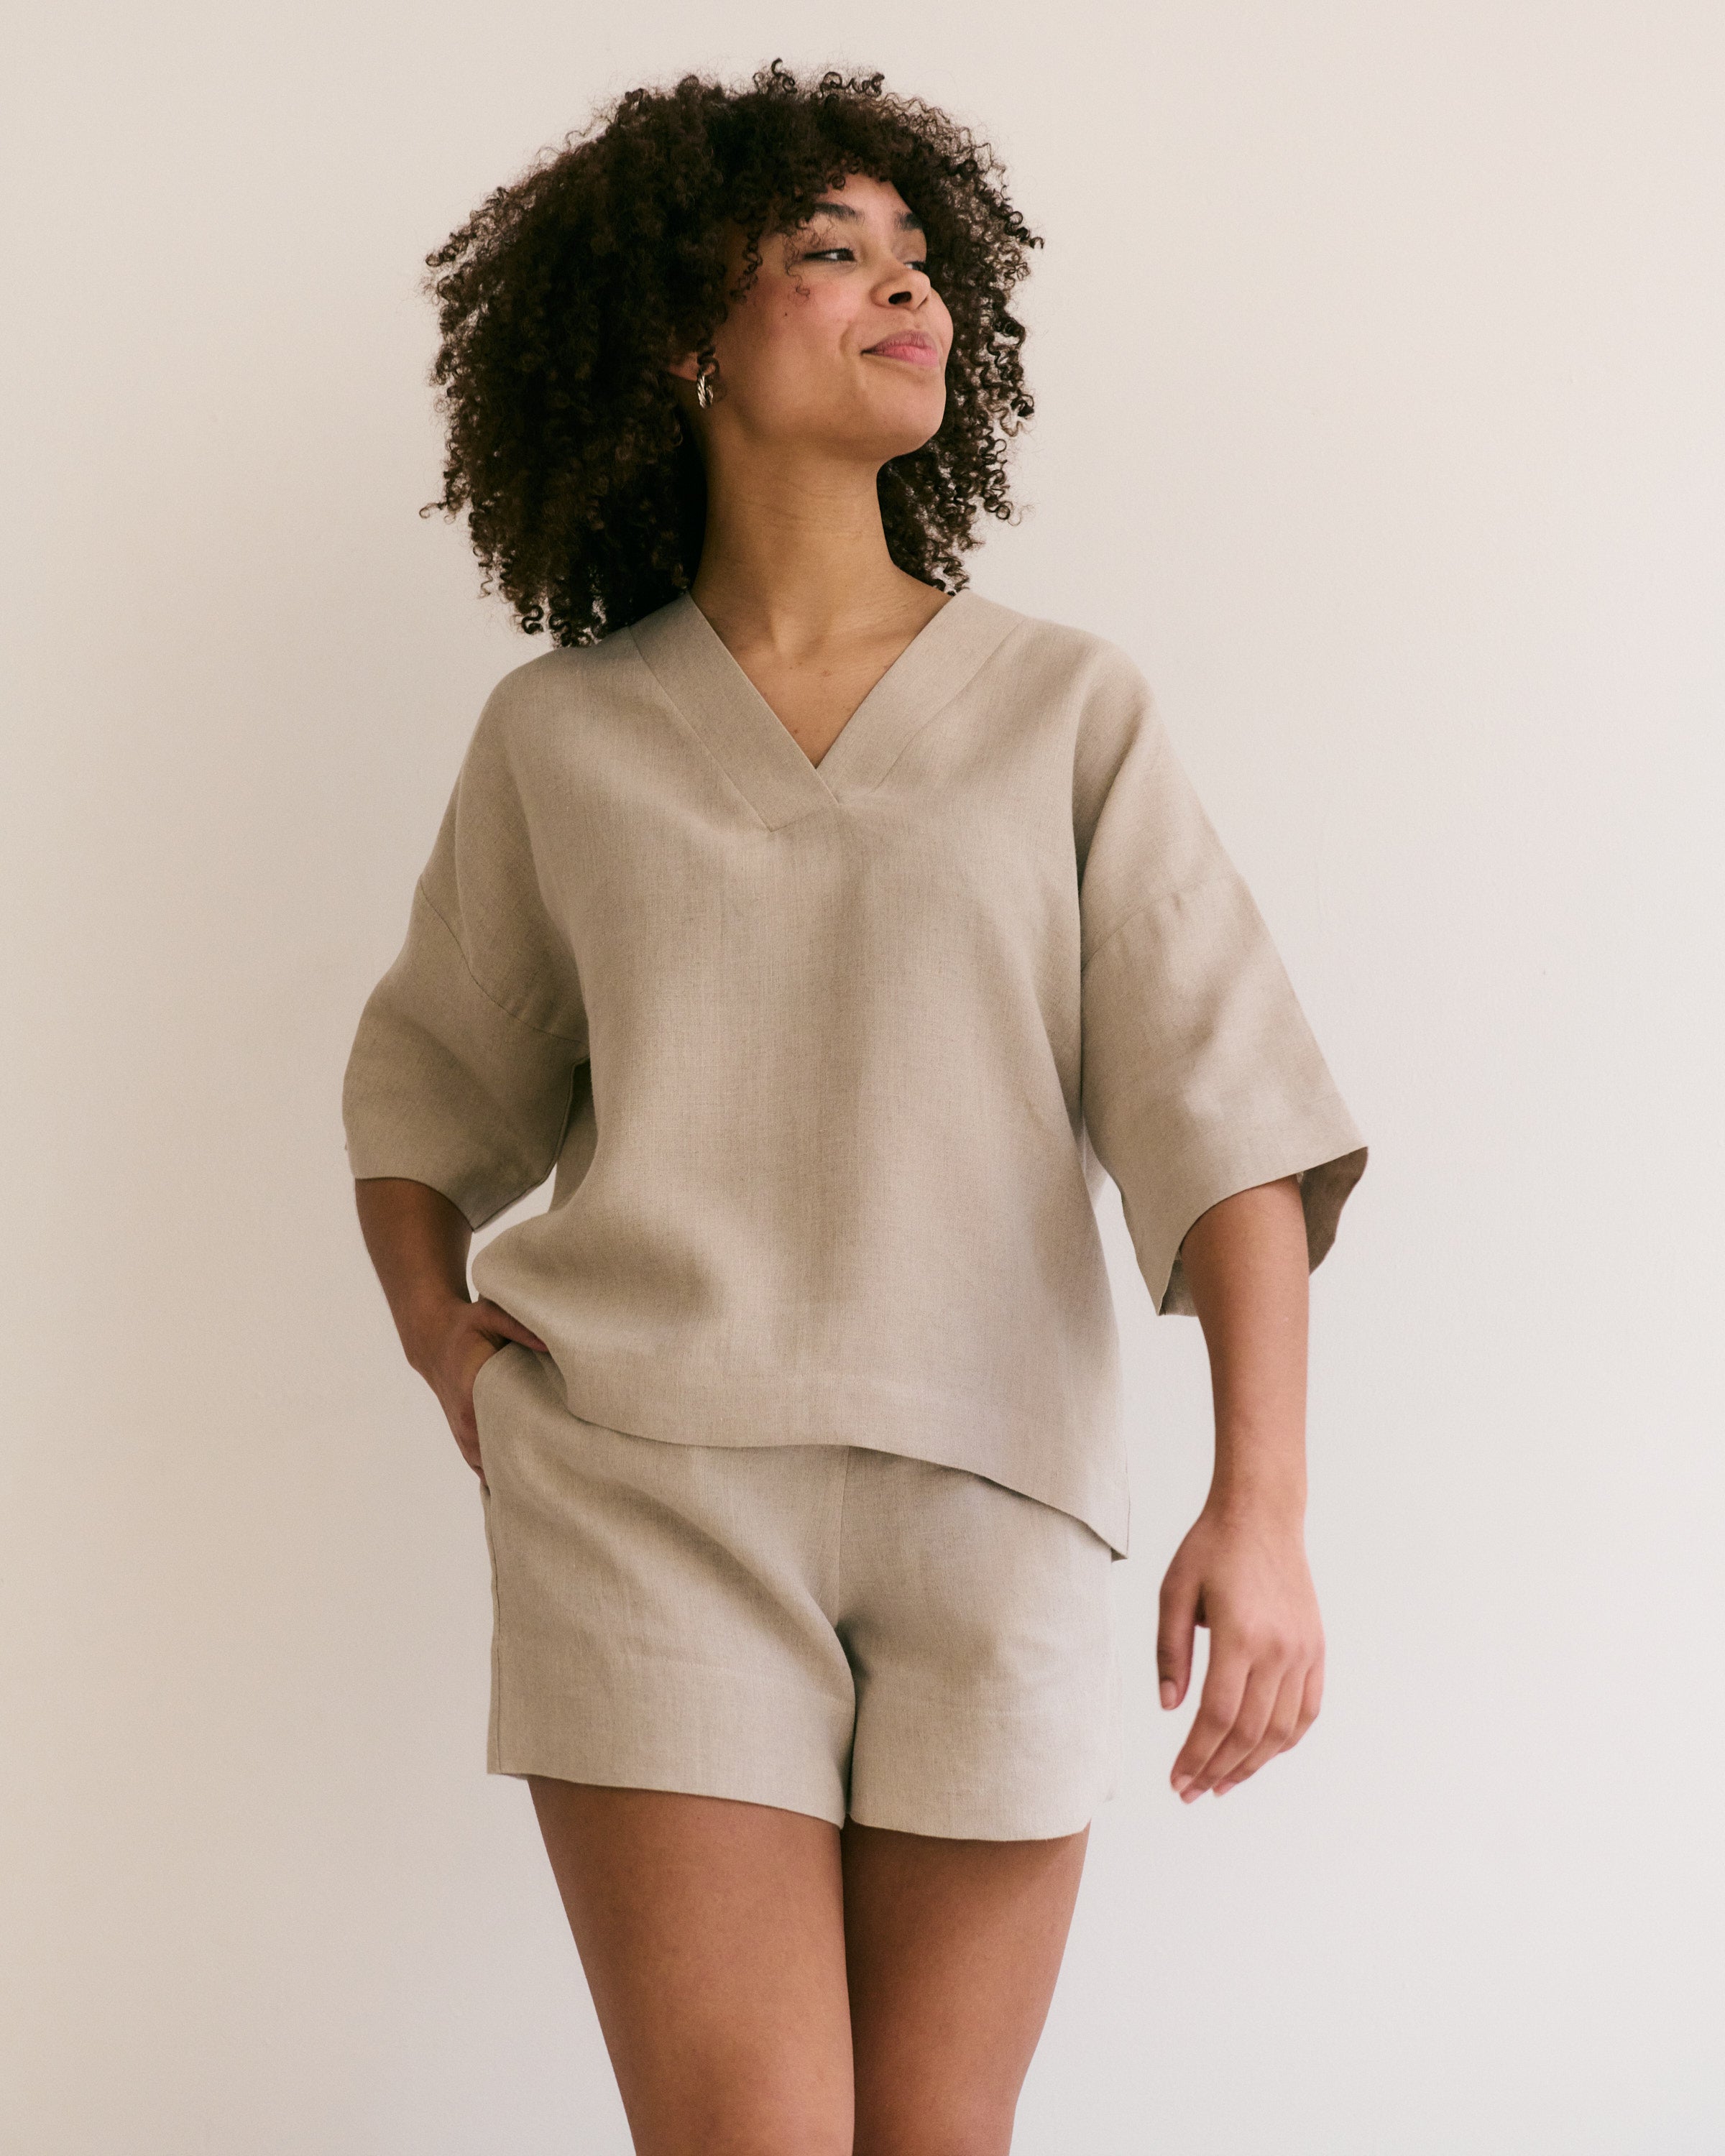 Comfortable and light natural Belgian linen shorts and top.